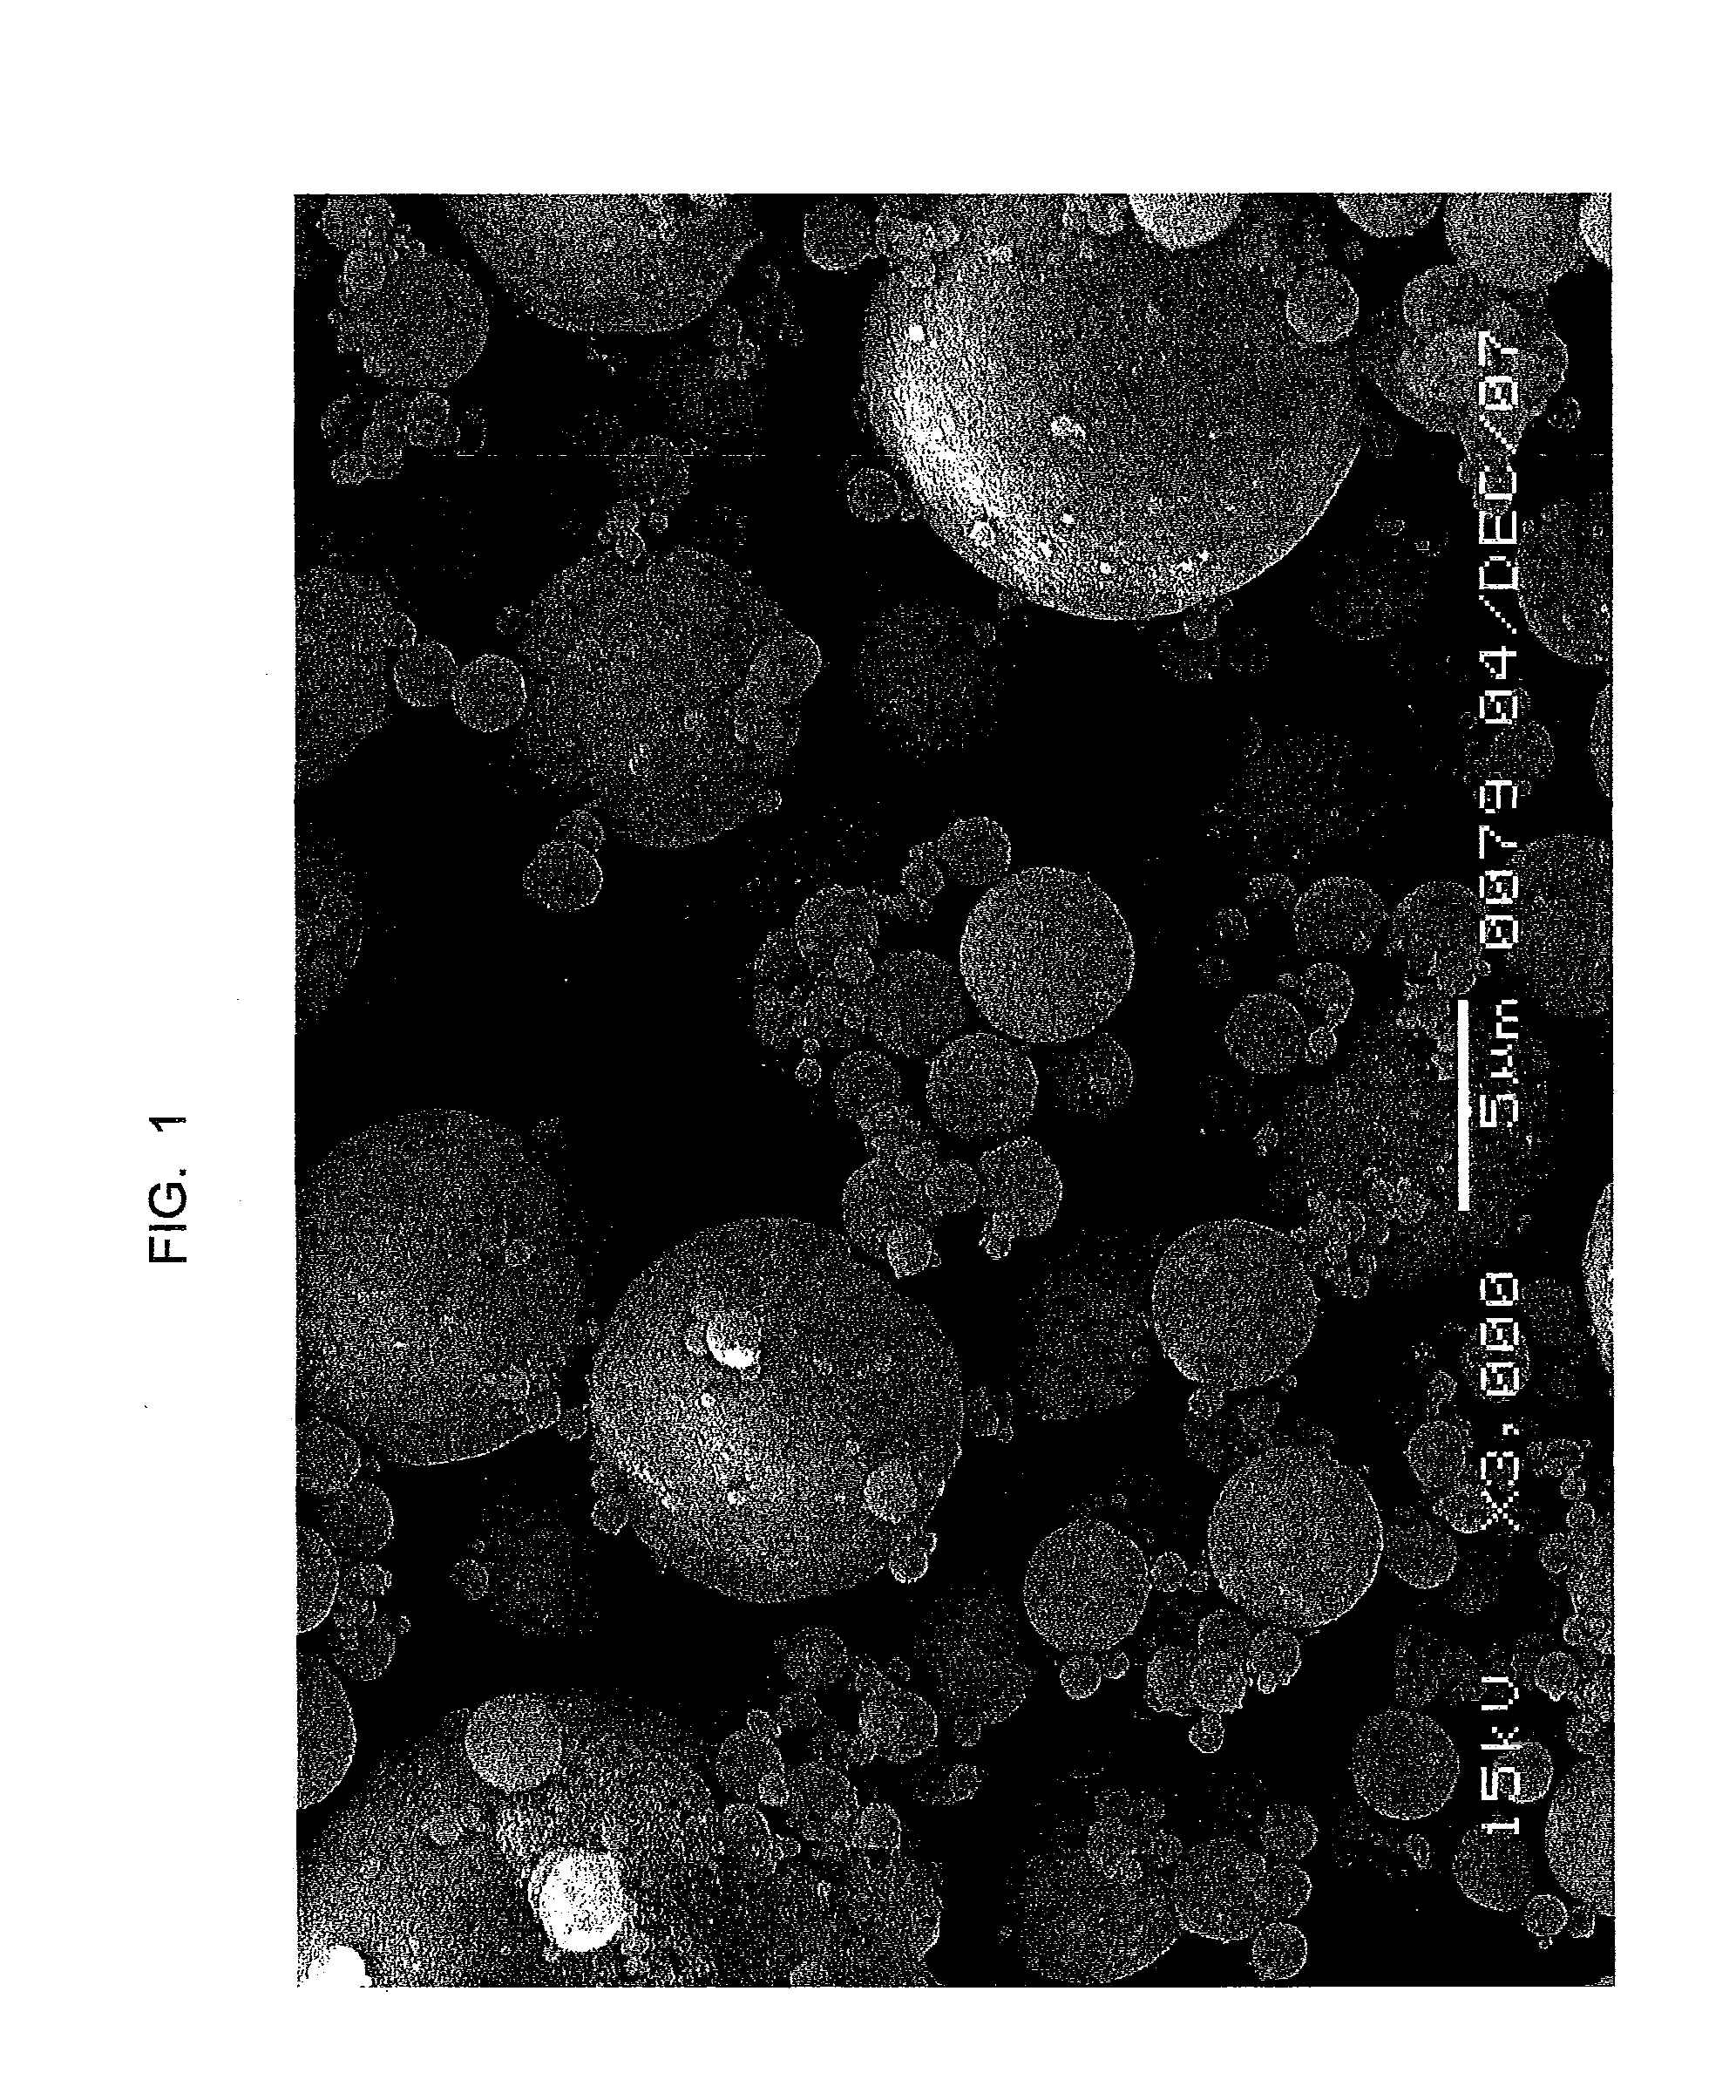 Porous Silica-Based Particles Having Smooth Surface, Method for Production Thereof and Cosmetic Comprising Such Particles